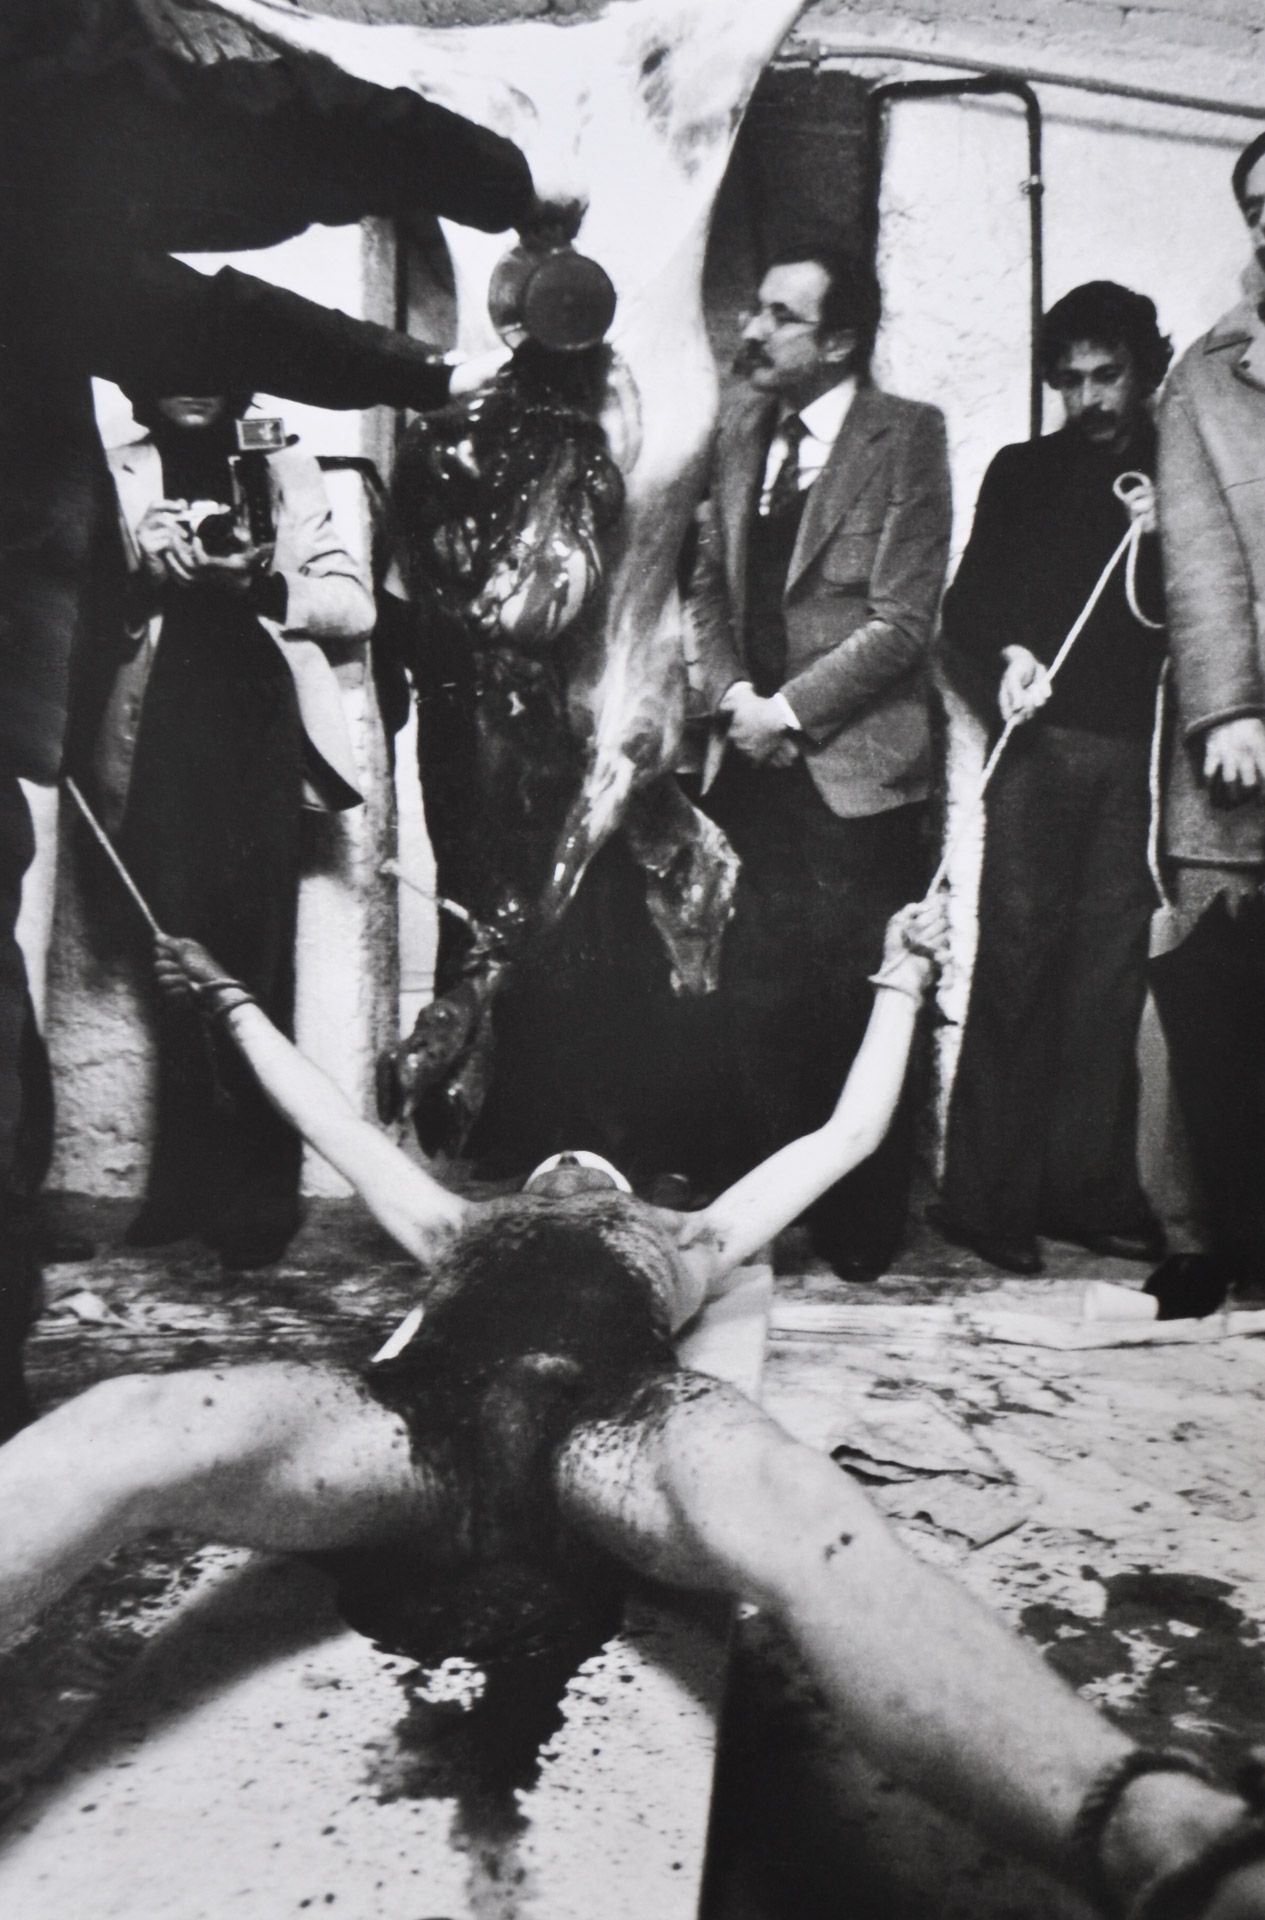 Hermann Nitsch - Orgien Mysterien Theater. 53. Aktion. Out Off, 1976 - Image 2 of 2